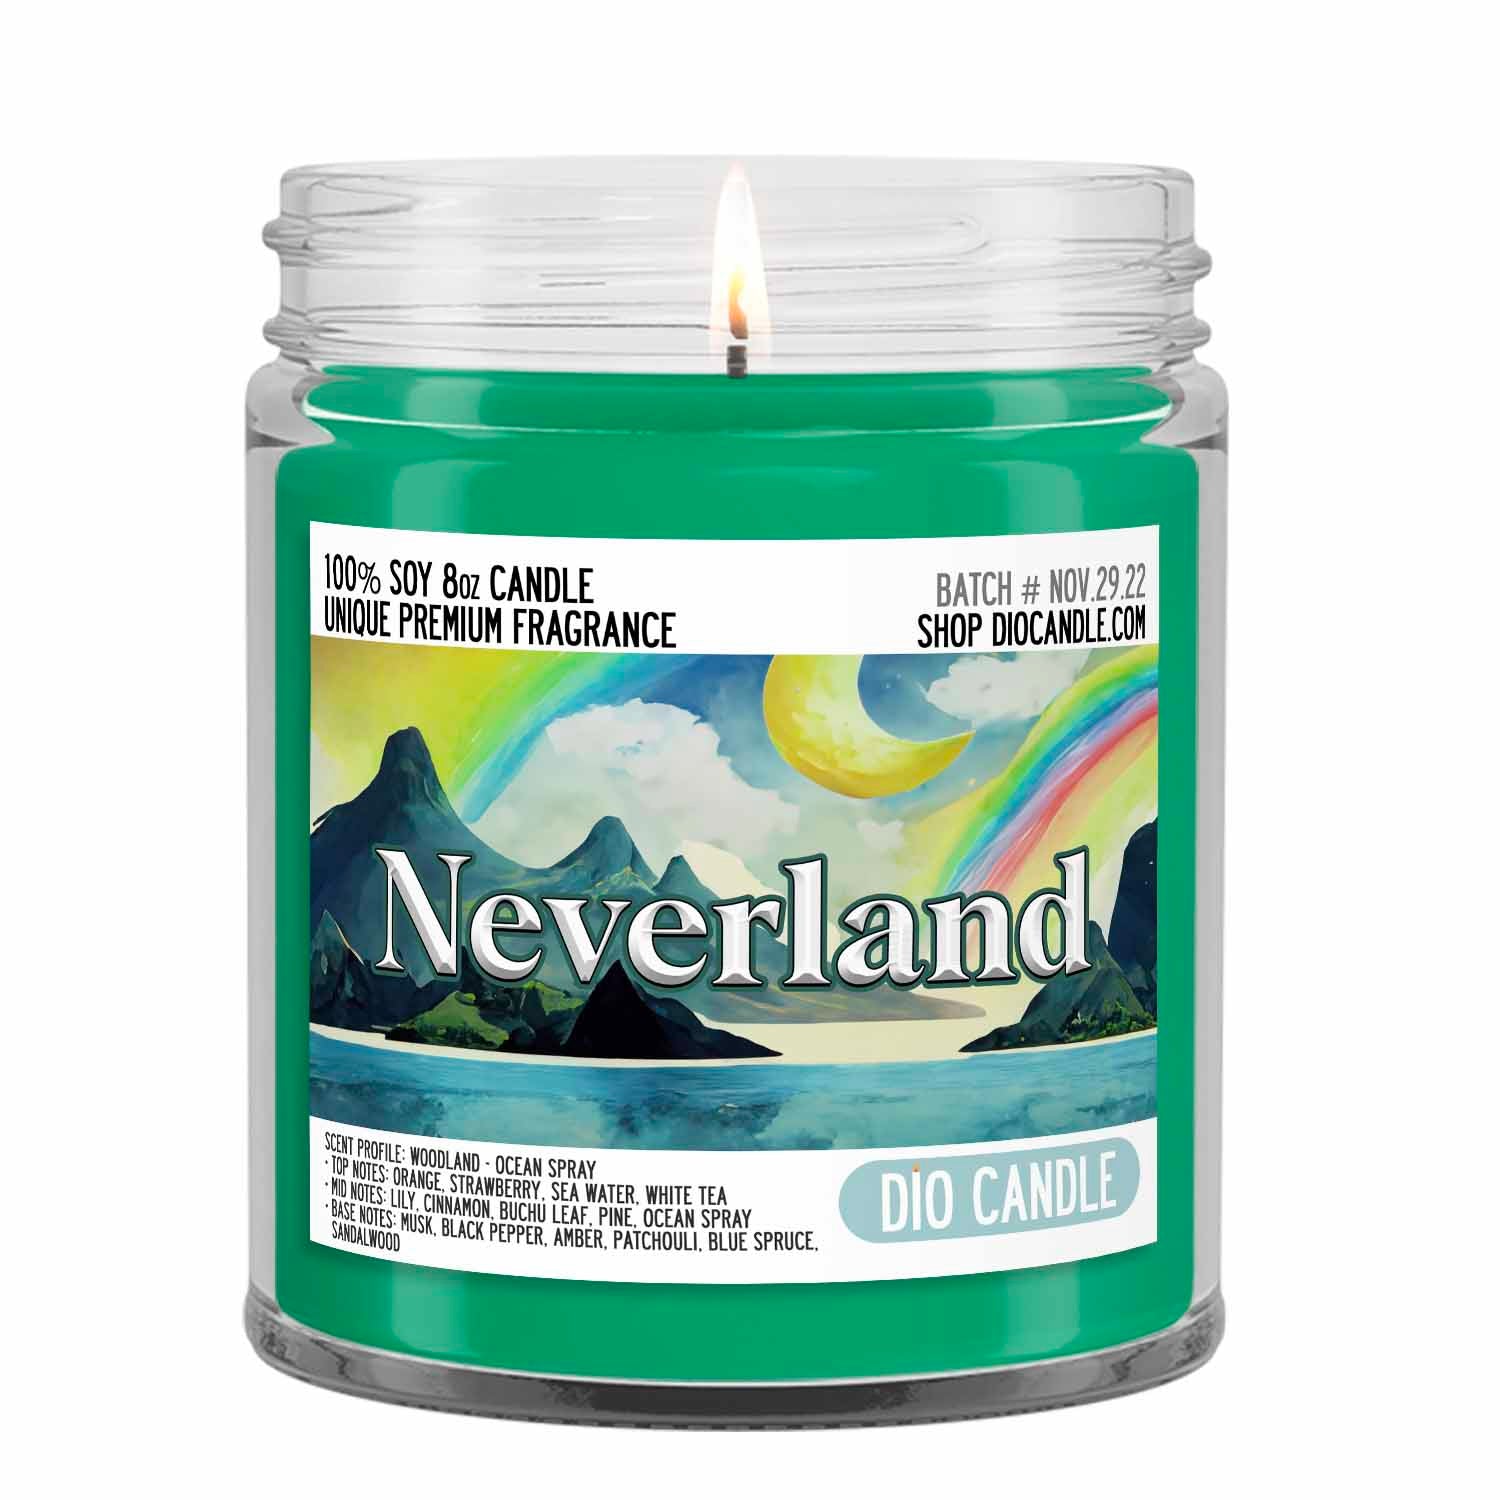 Scented Candle Day (November 1st)